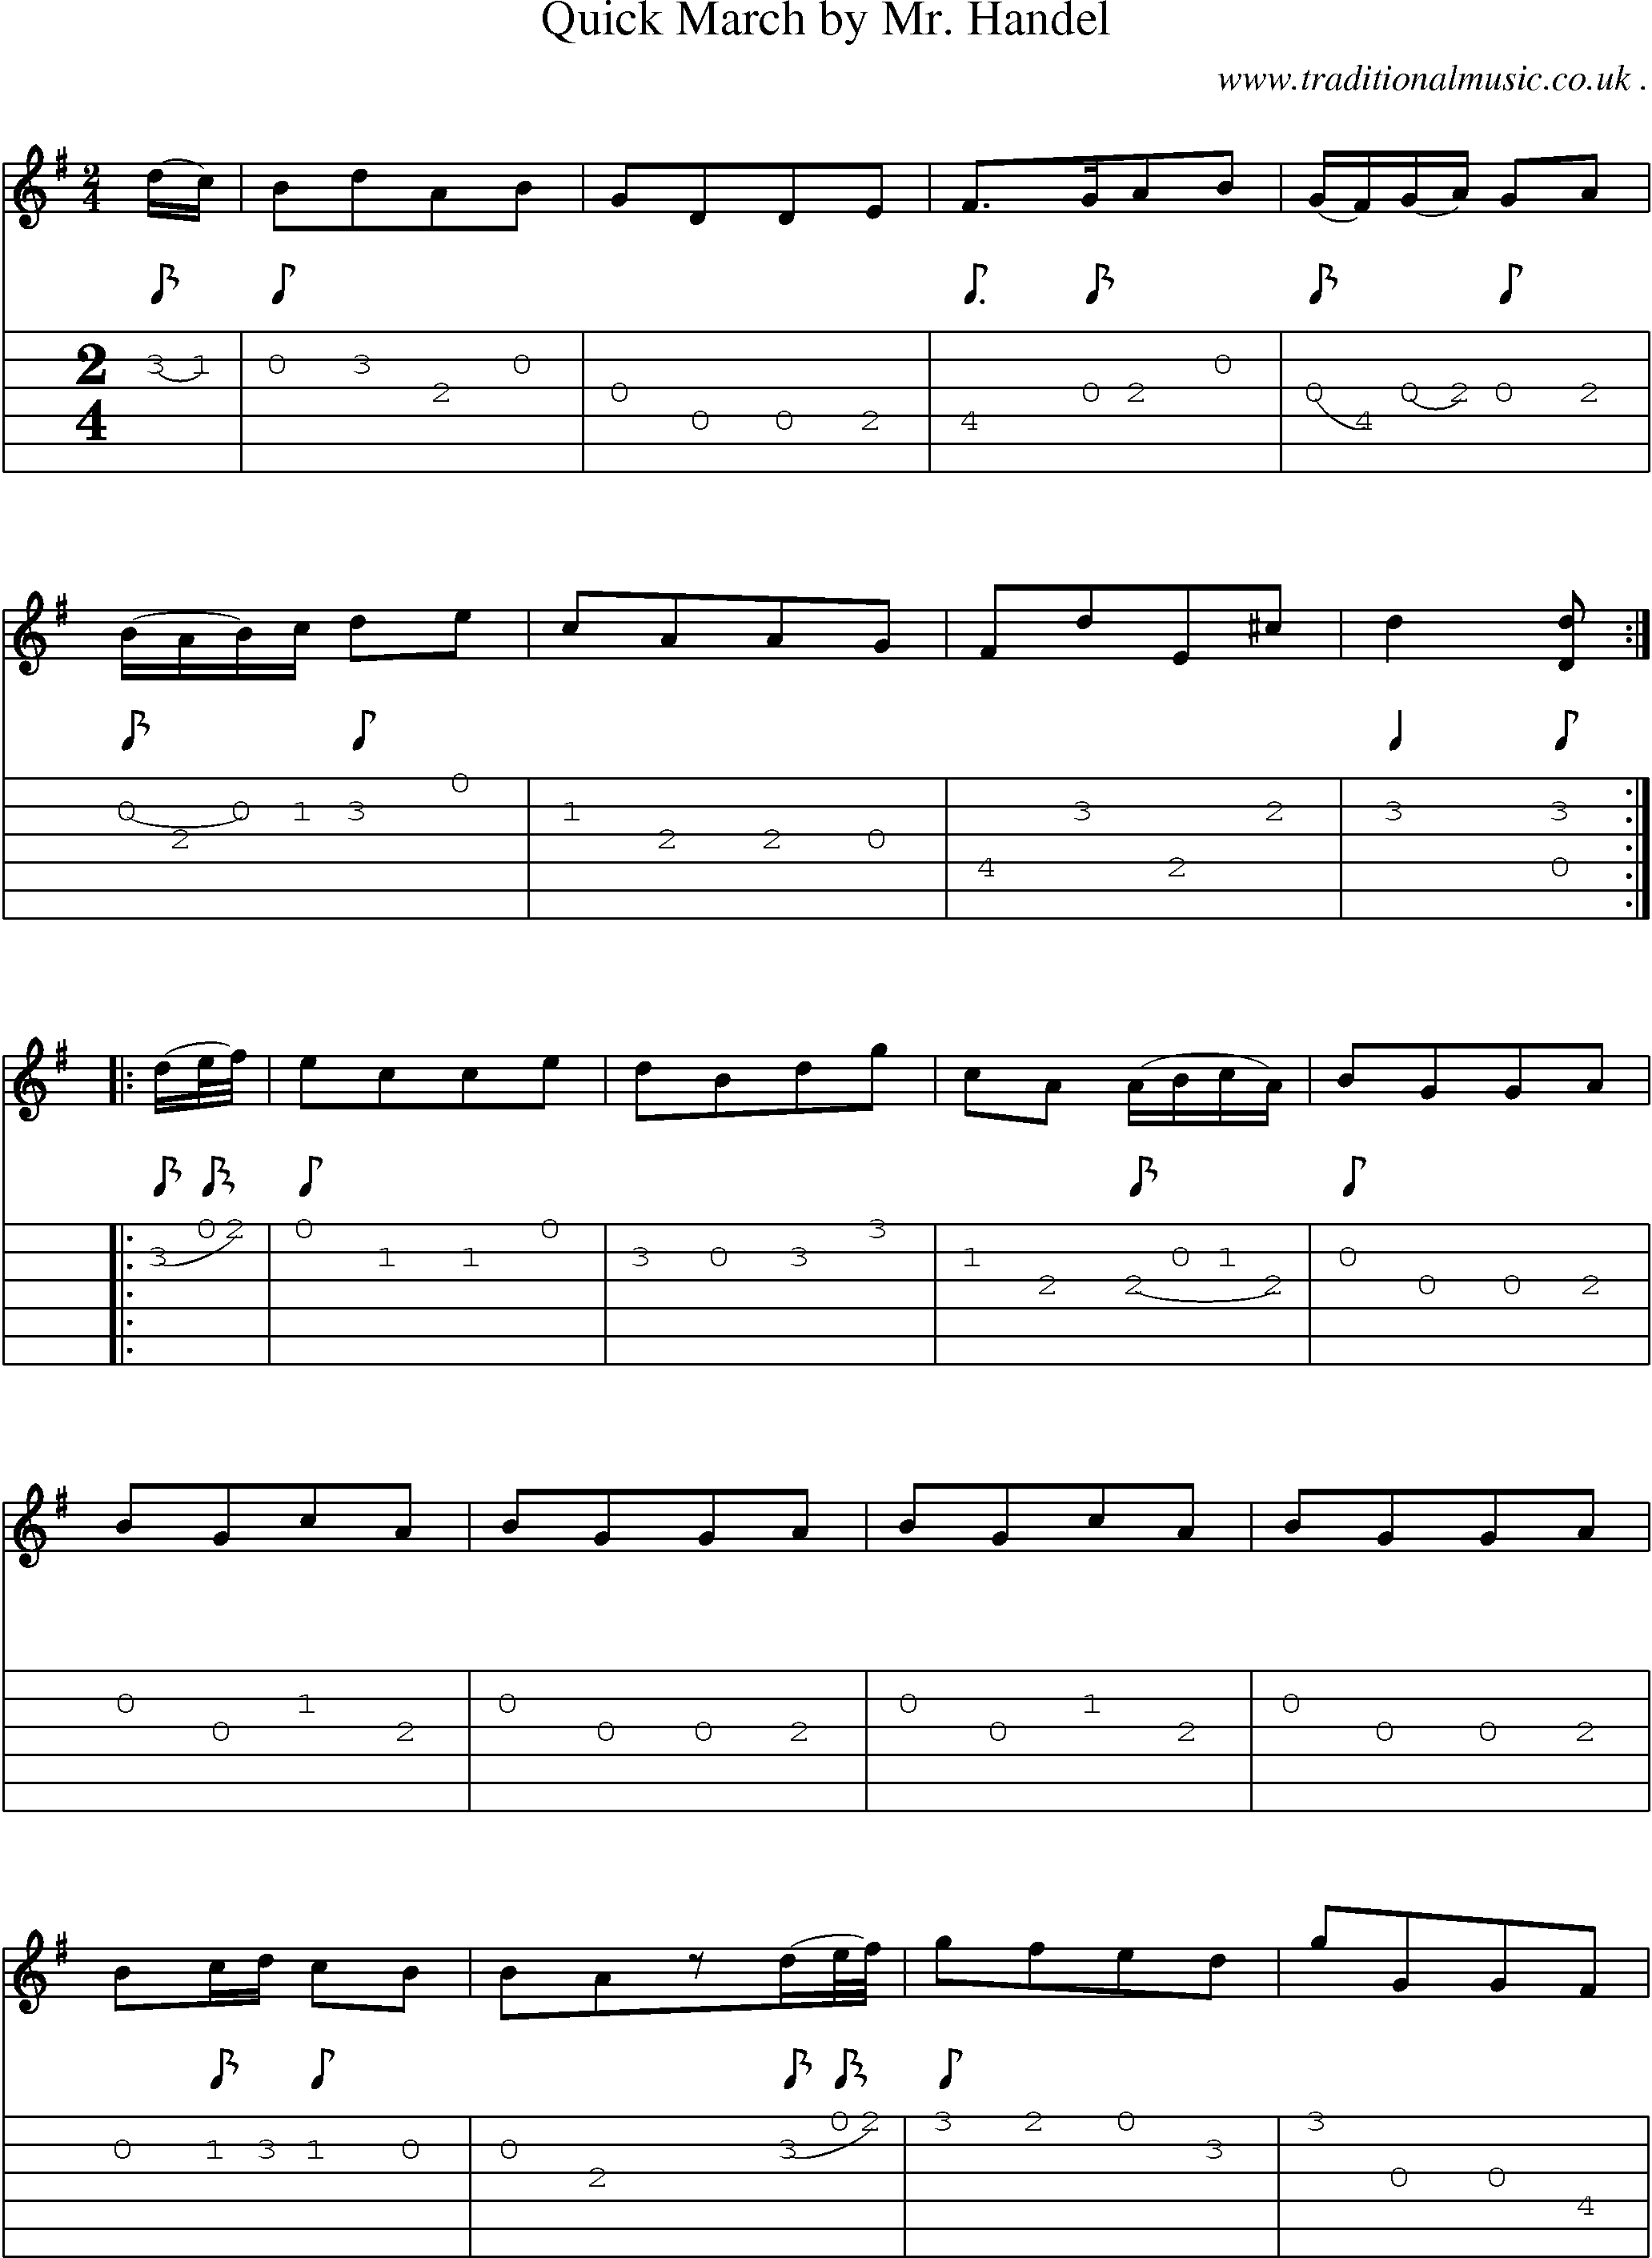 Sheet-music  score, Chords and Guitar Tabs for Quick March By Mr Handel